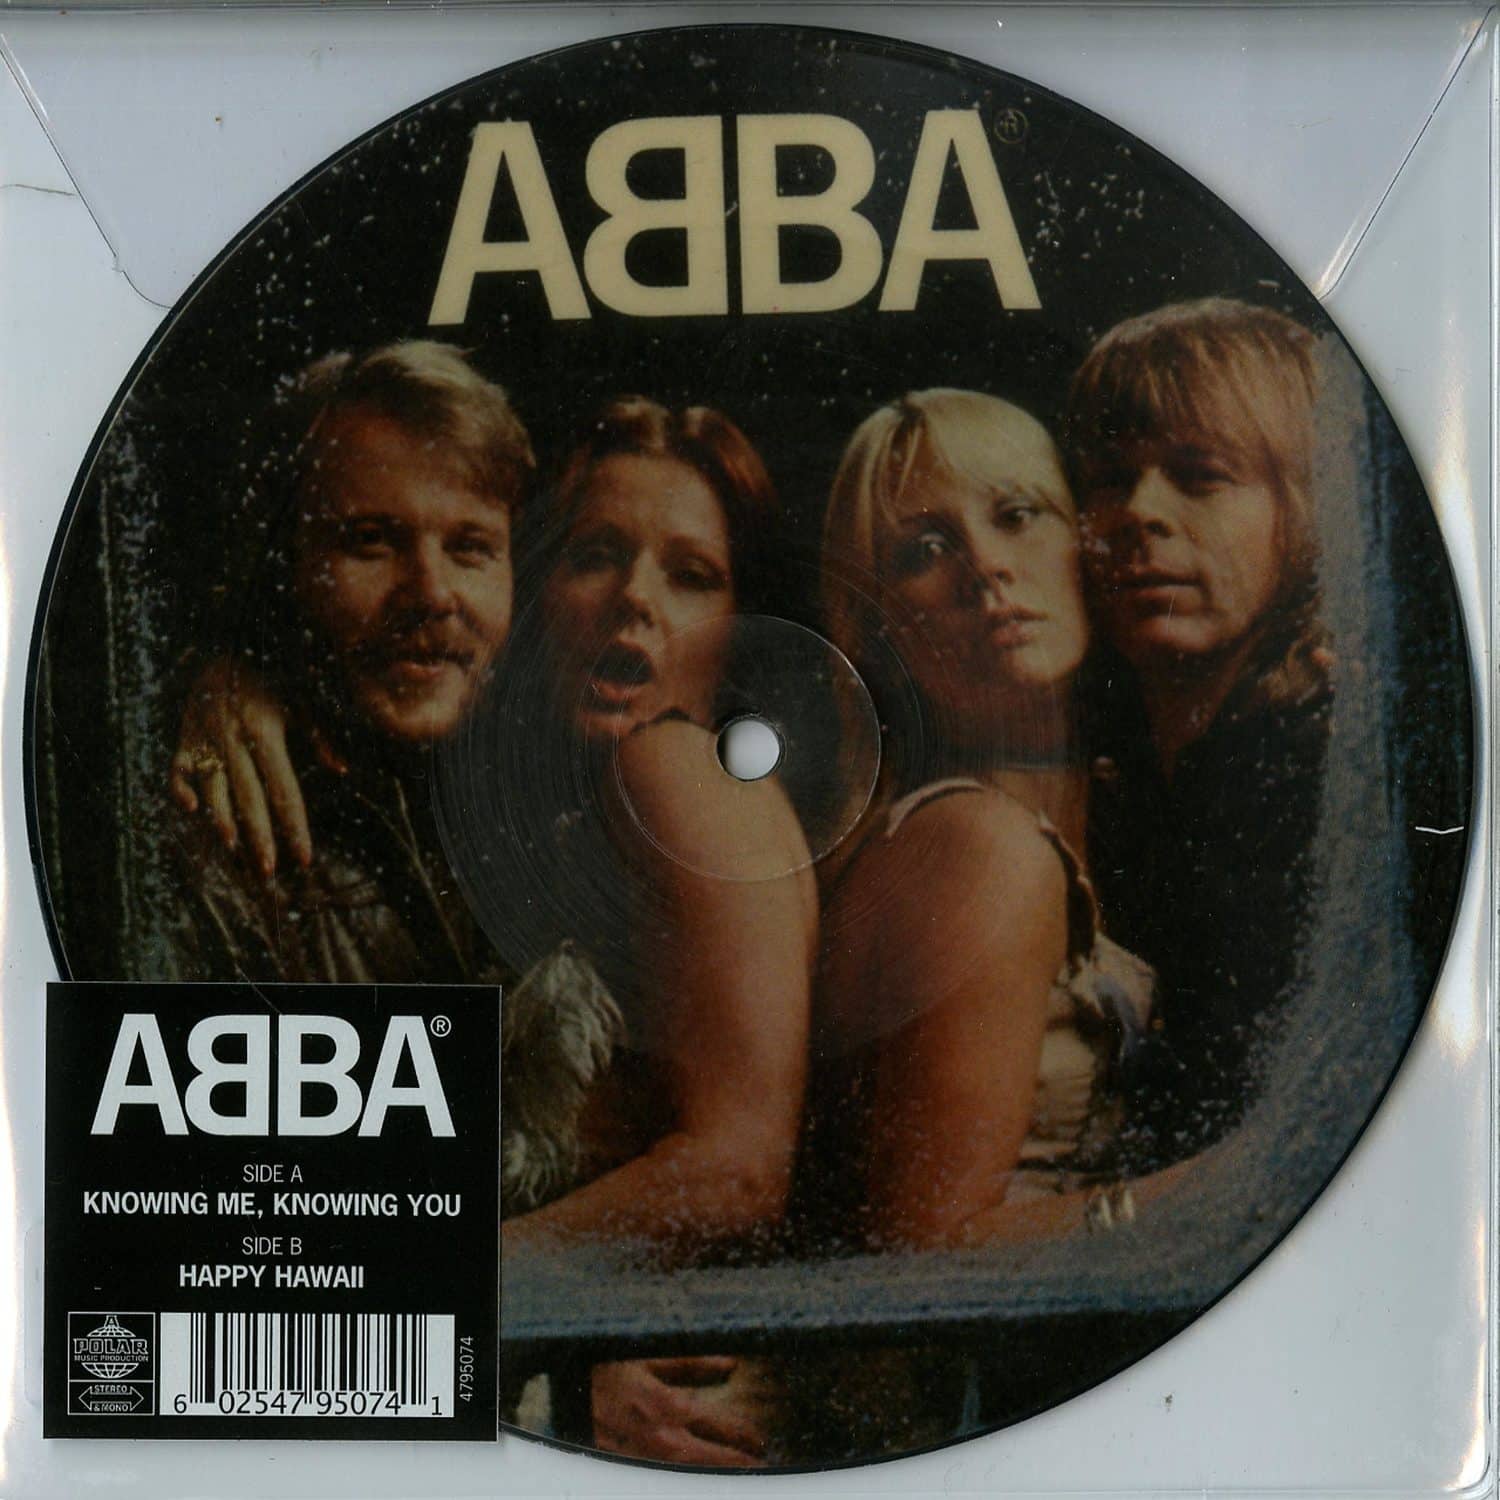 Abba - KNOWING ME, KNOWING YOU / HAPPY HAWAII 